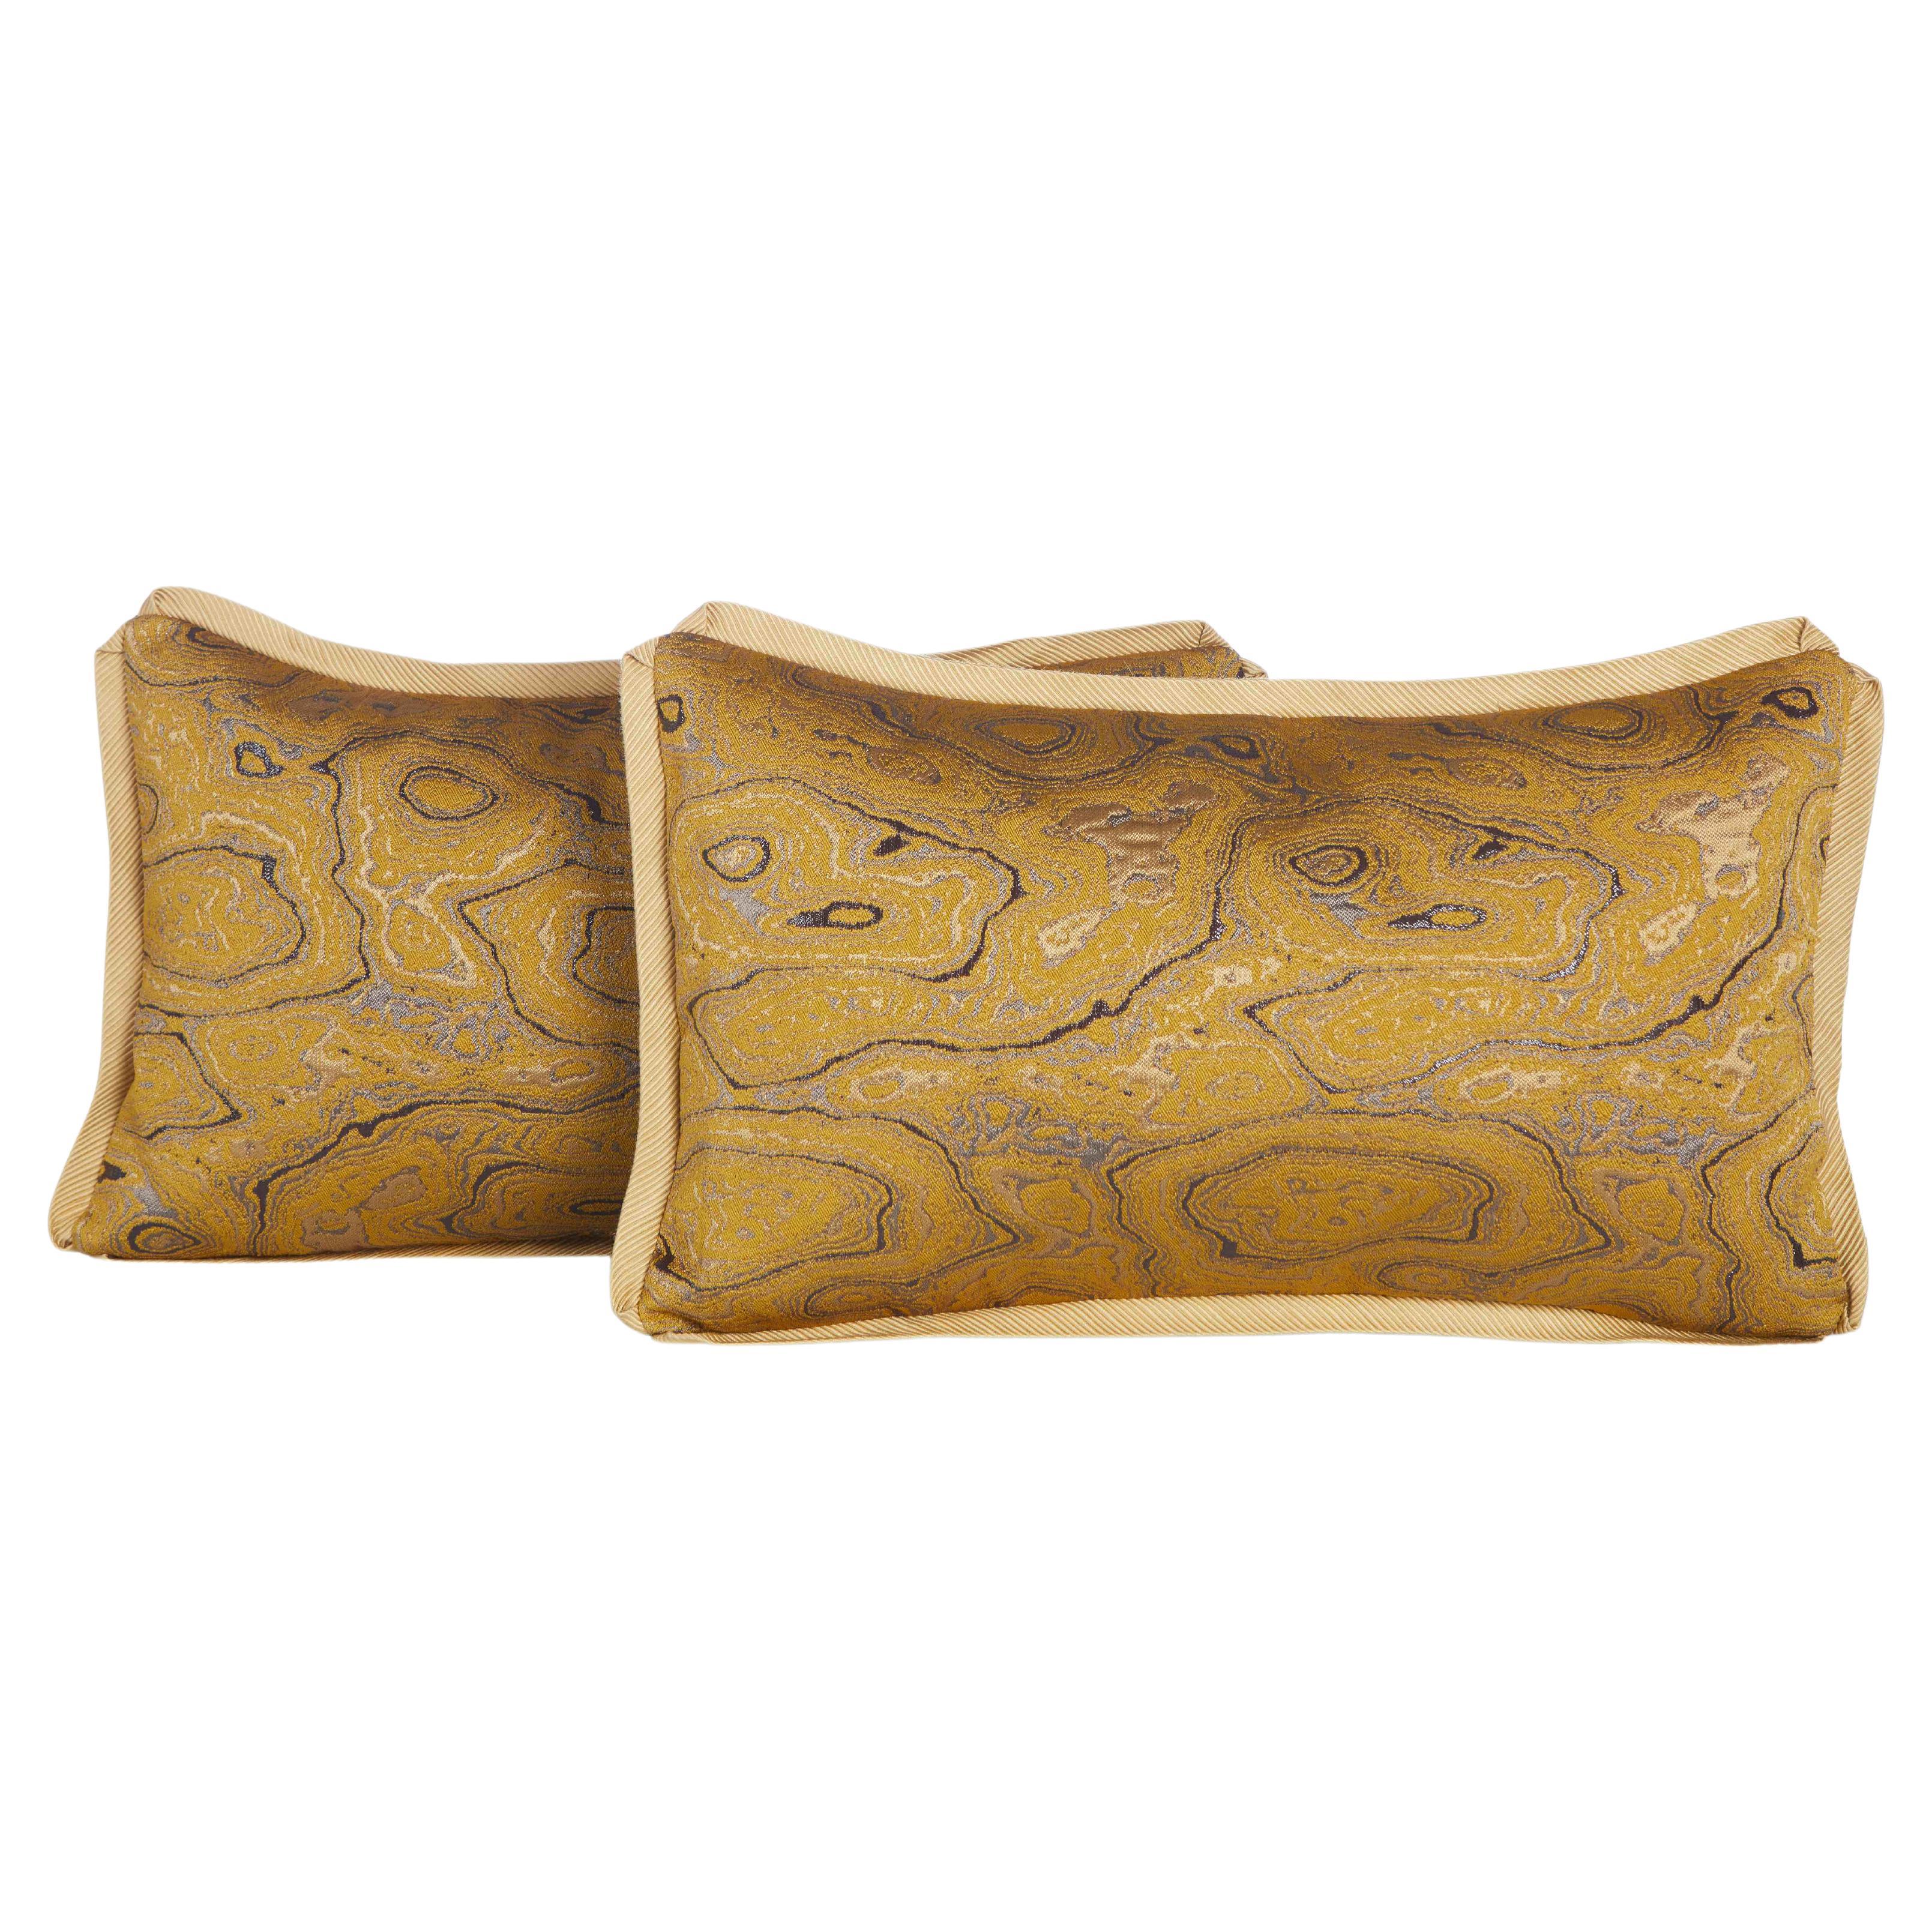 Pair of Brocaded Silk with Metalic Thread Dries Van Noten Fabric Cushion For Sale